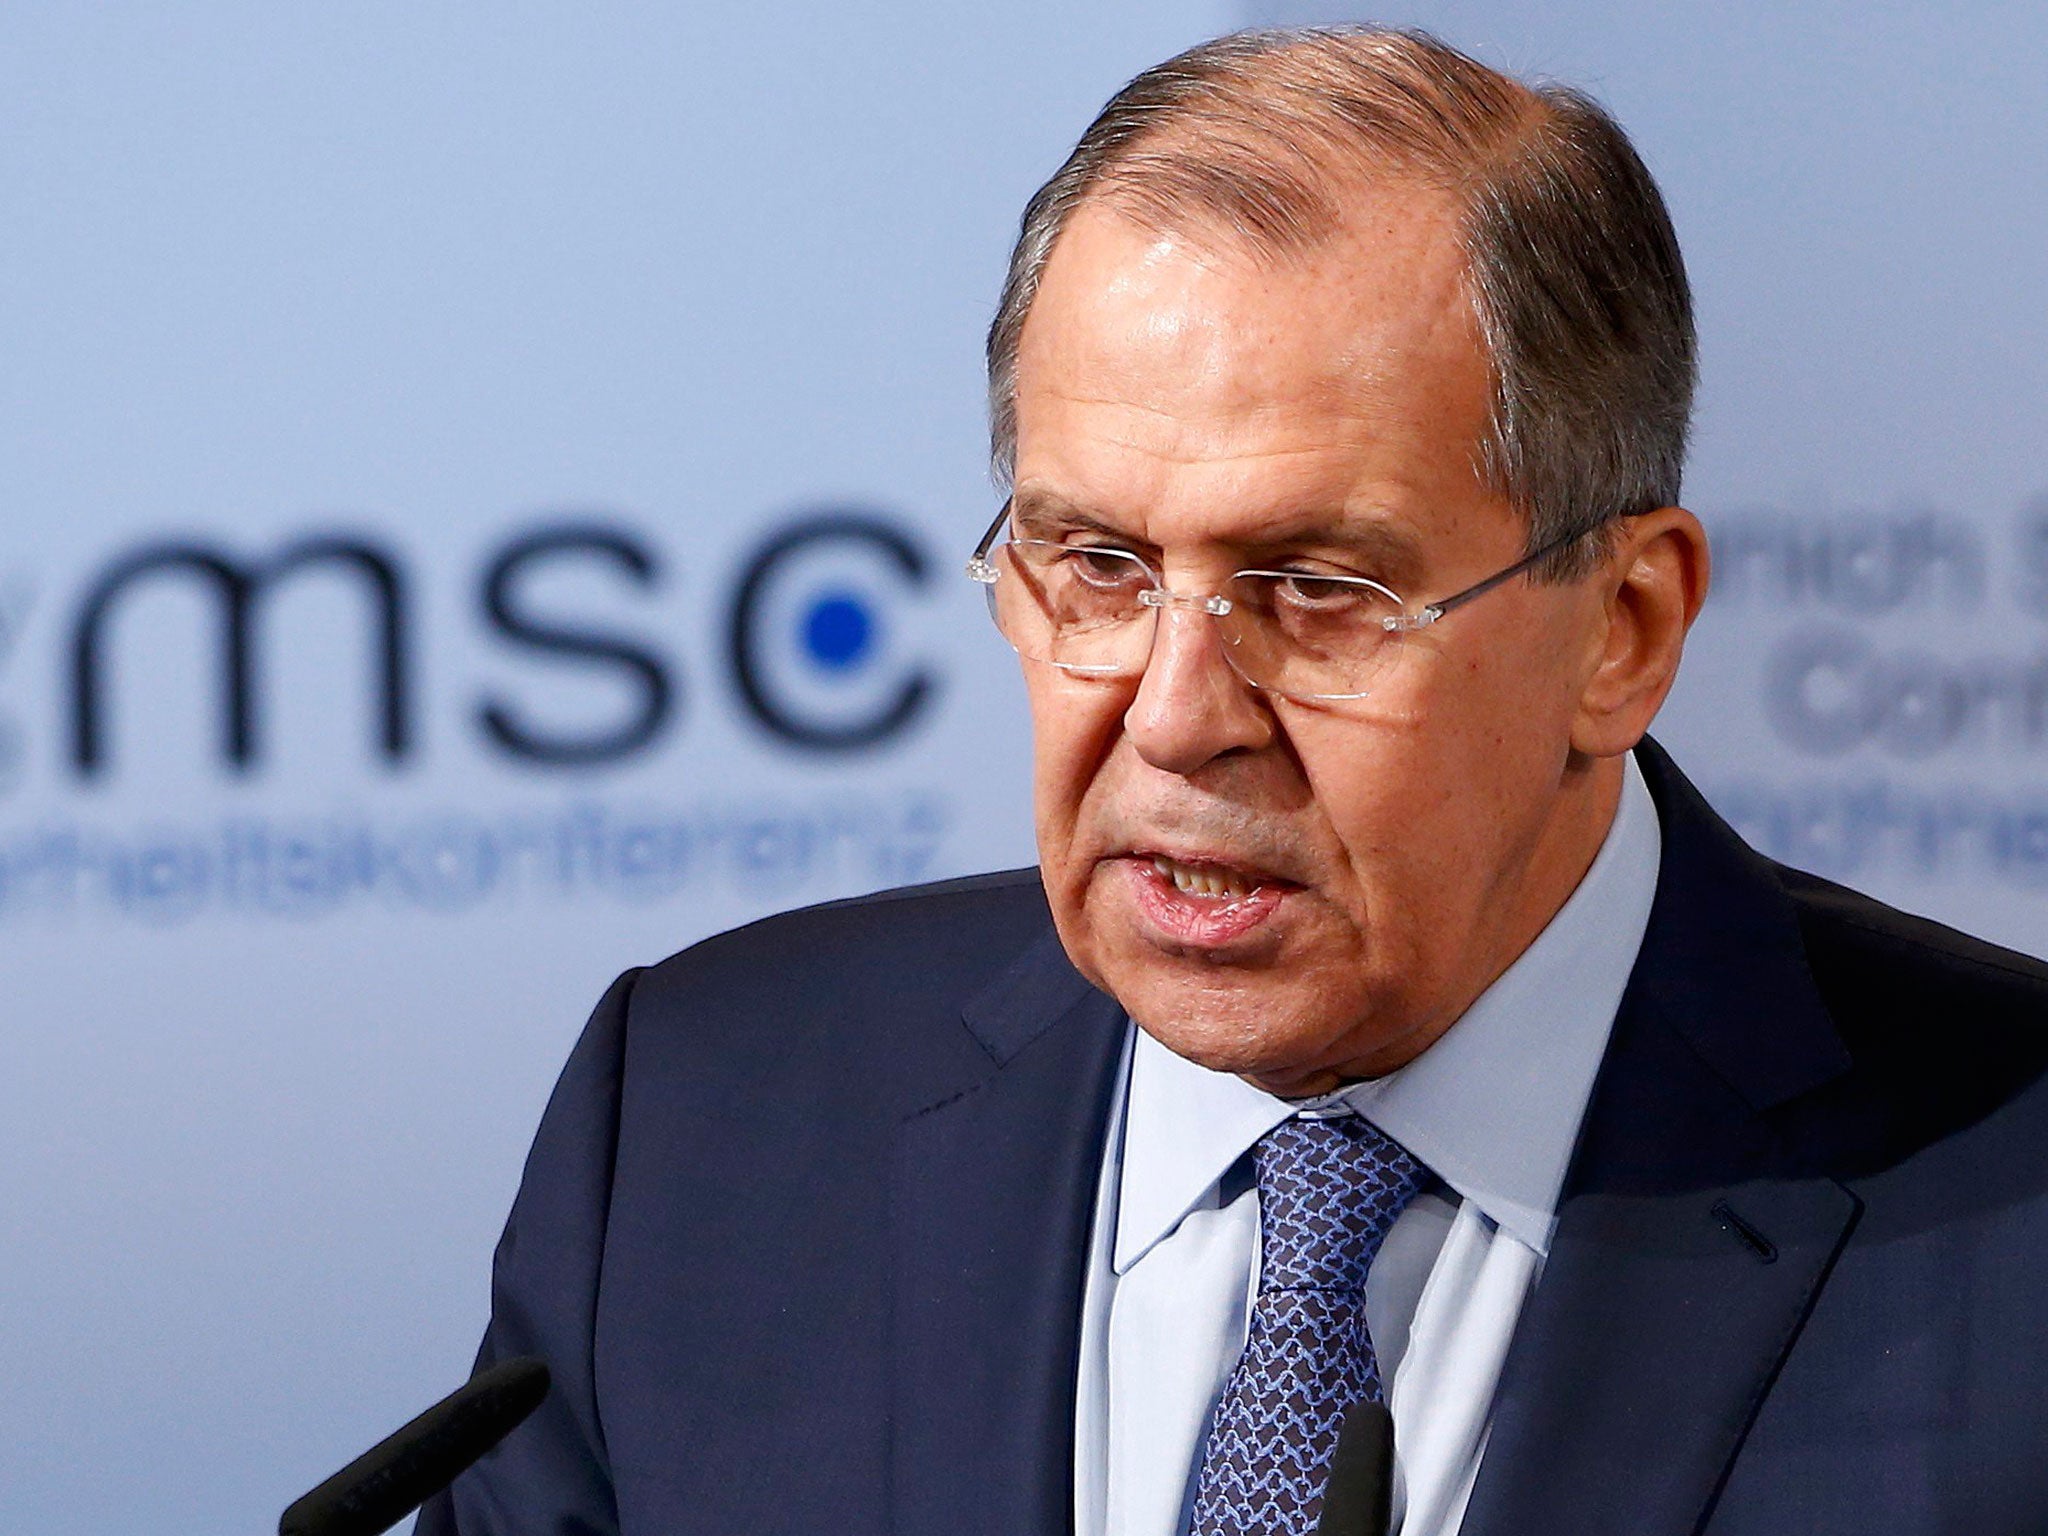 Russian Foreign Minister Sergei Lavrov called his Iranian counterpart today